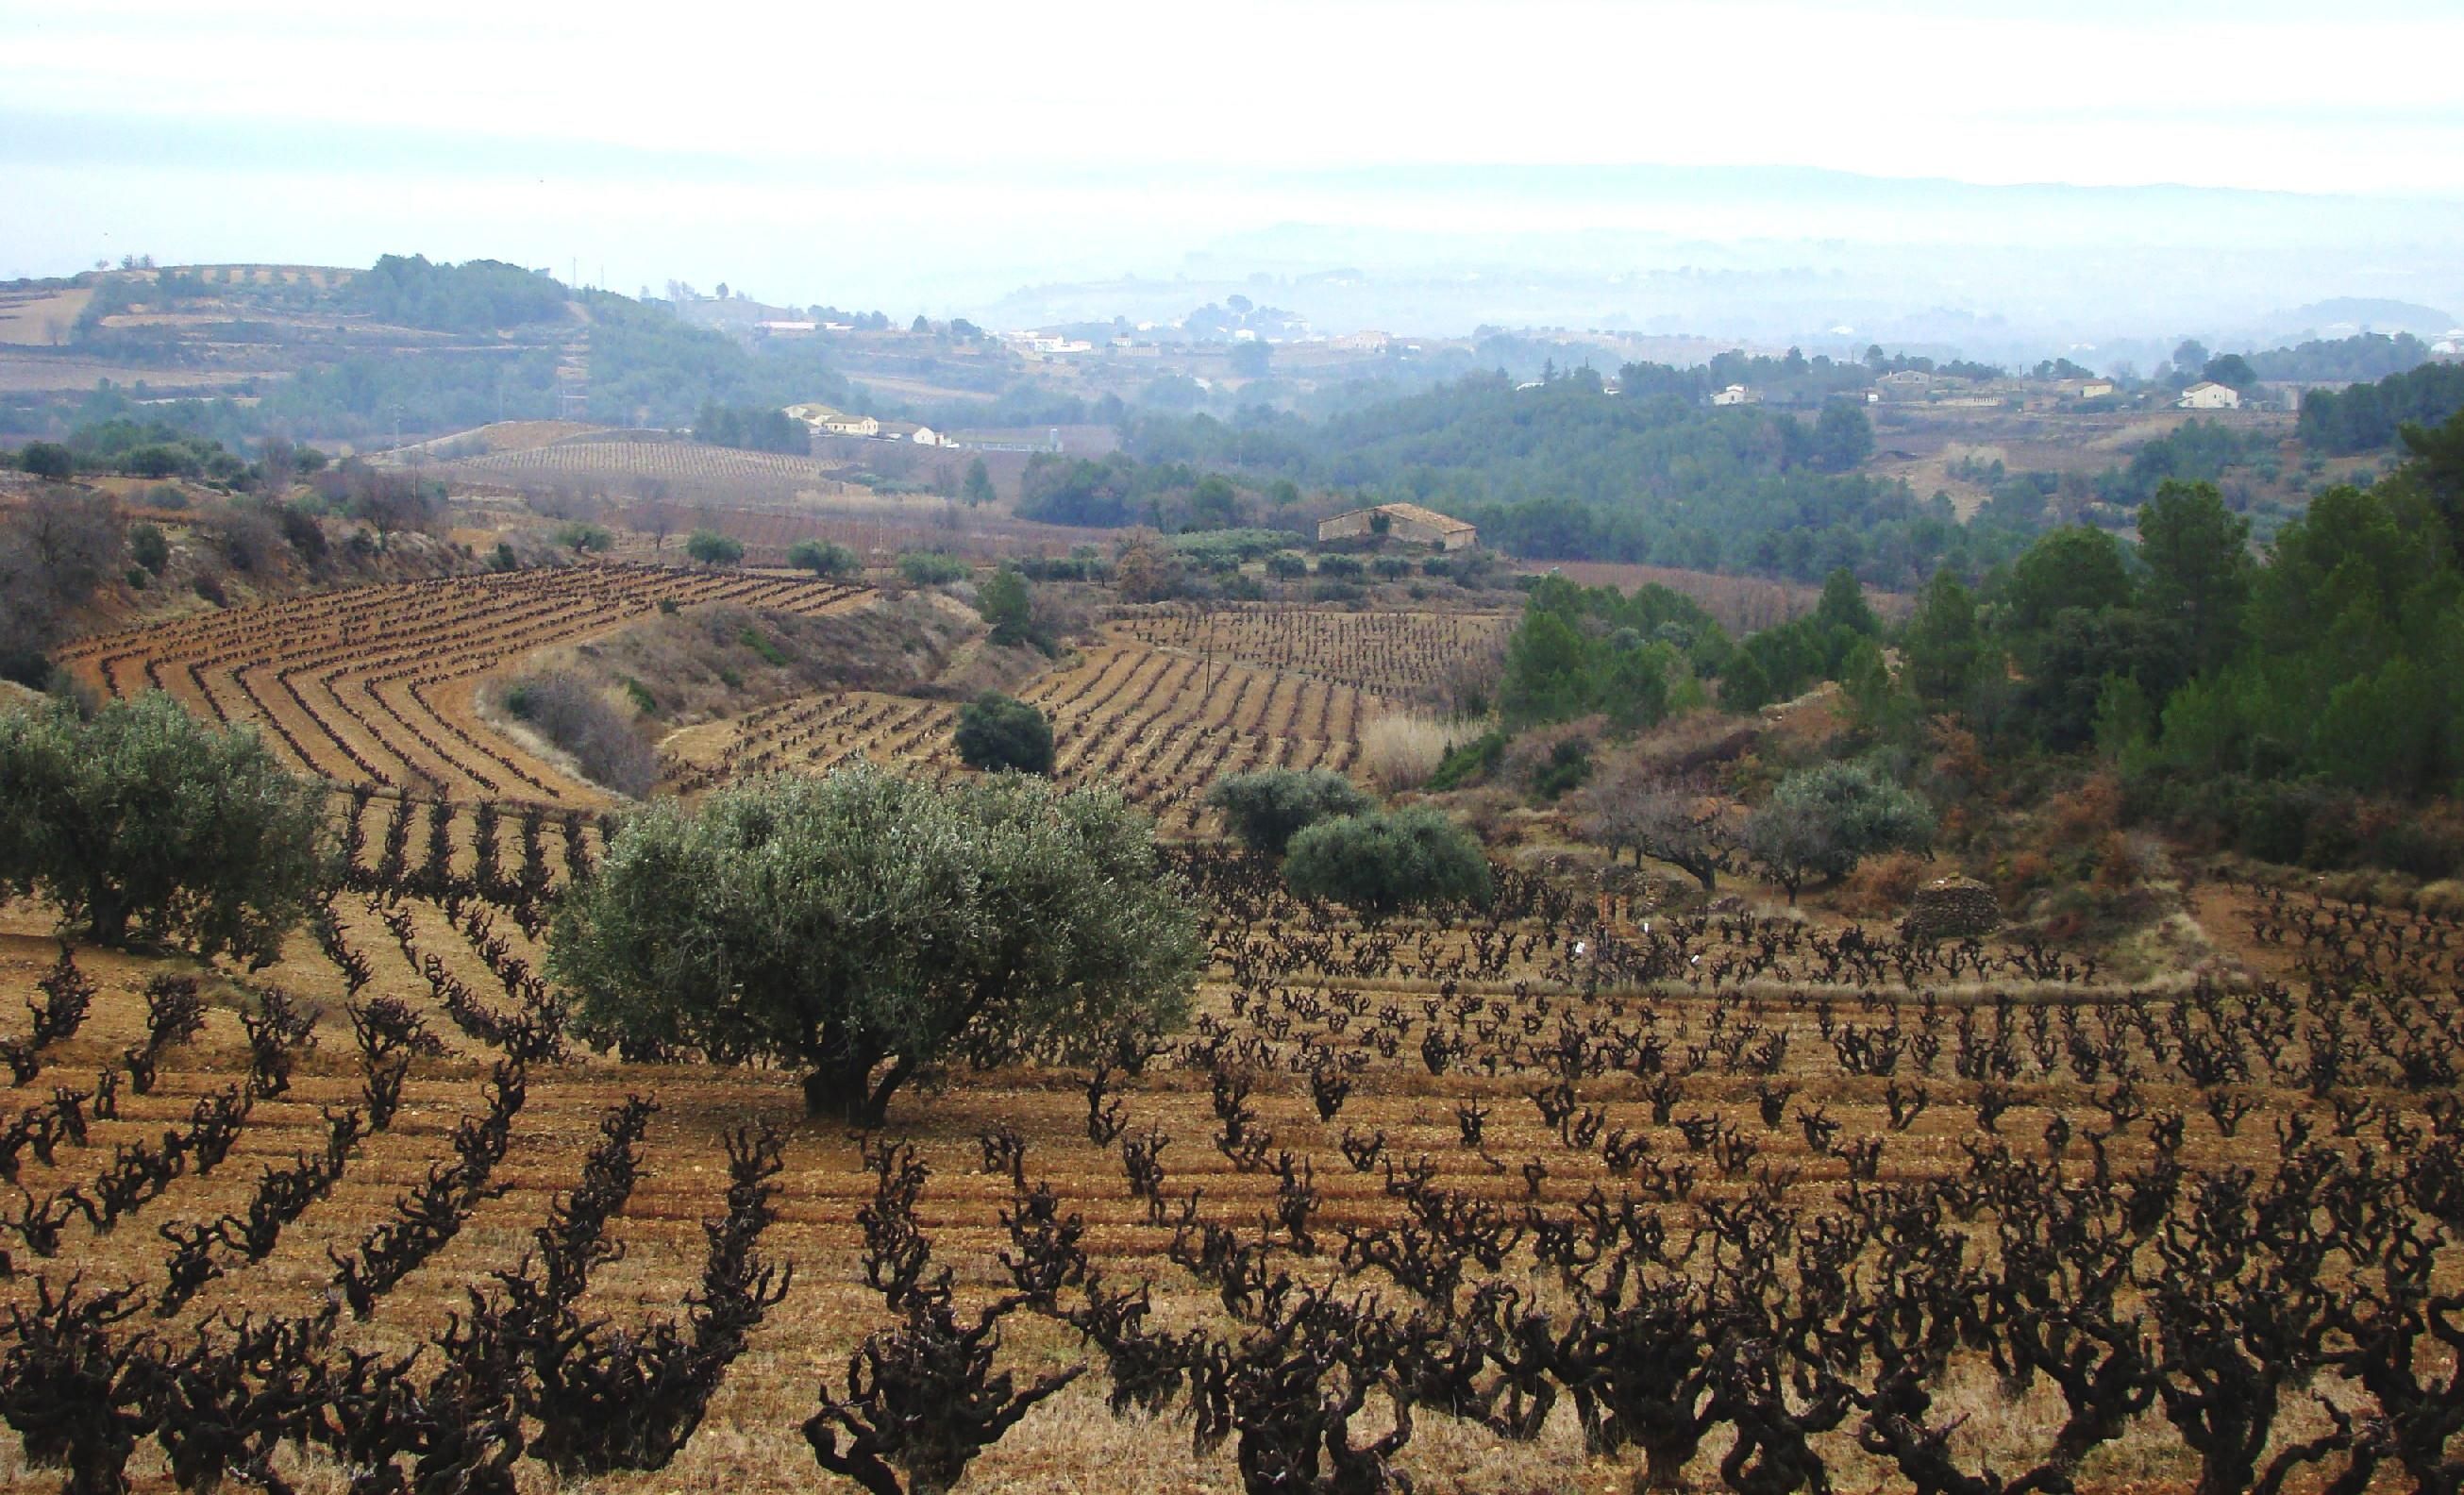 The old vines are plant at 500 meters of altitude